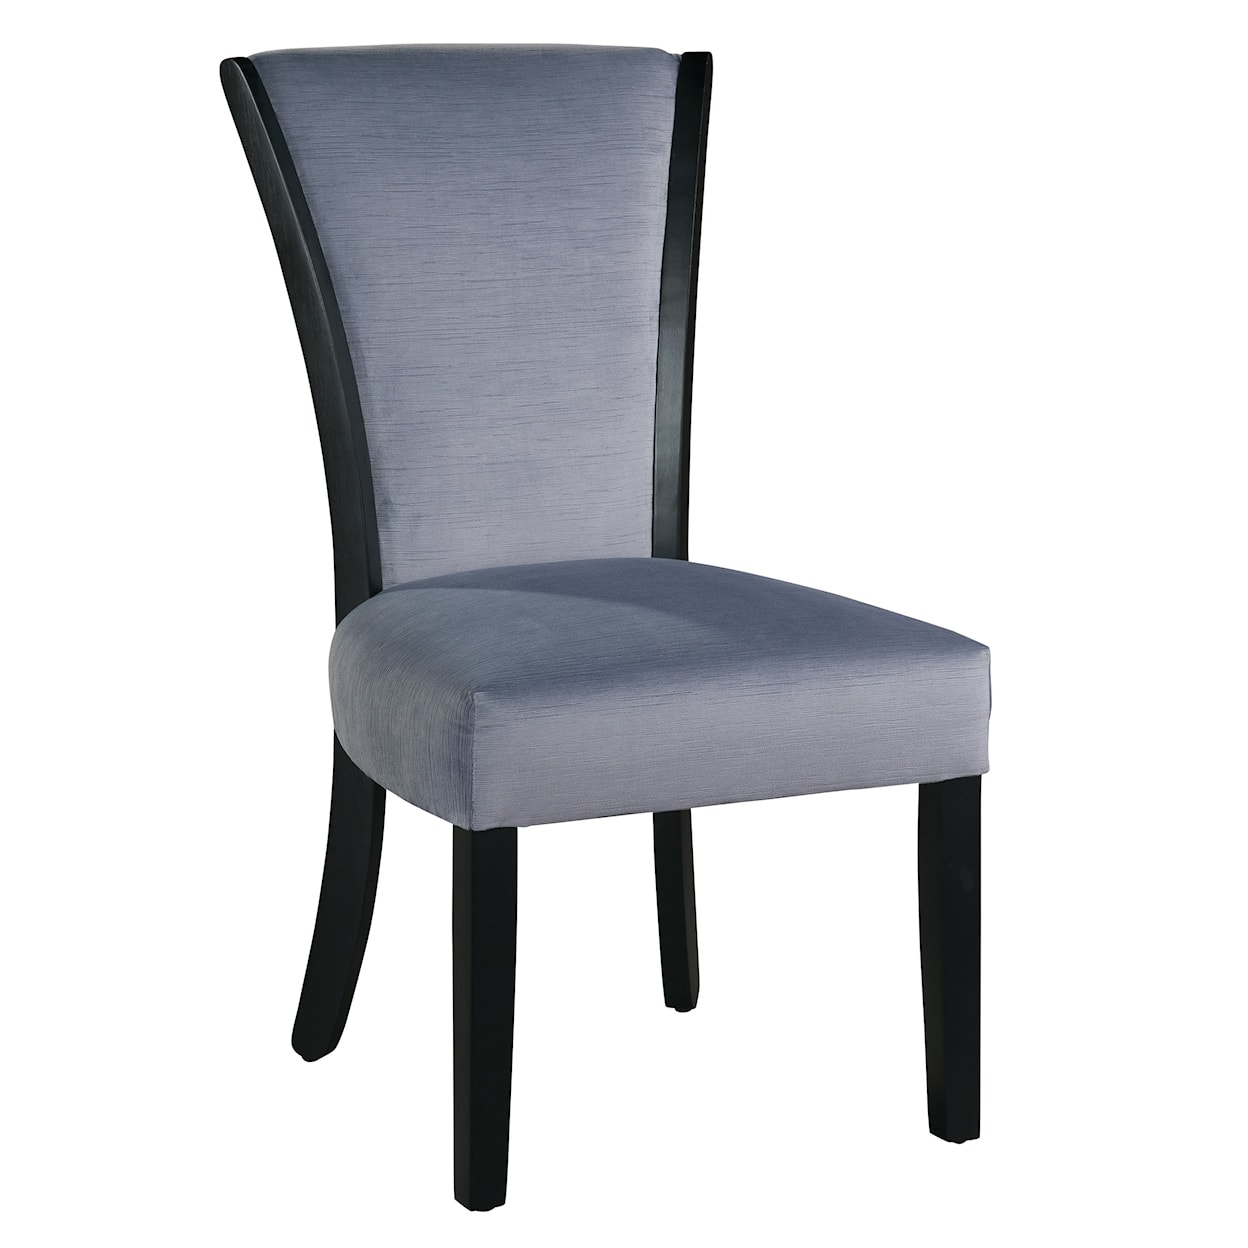 Hekman Upholstery Bethany Dining Chair